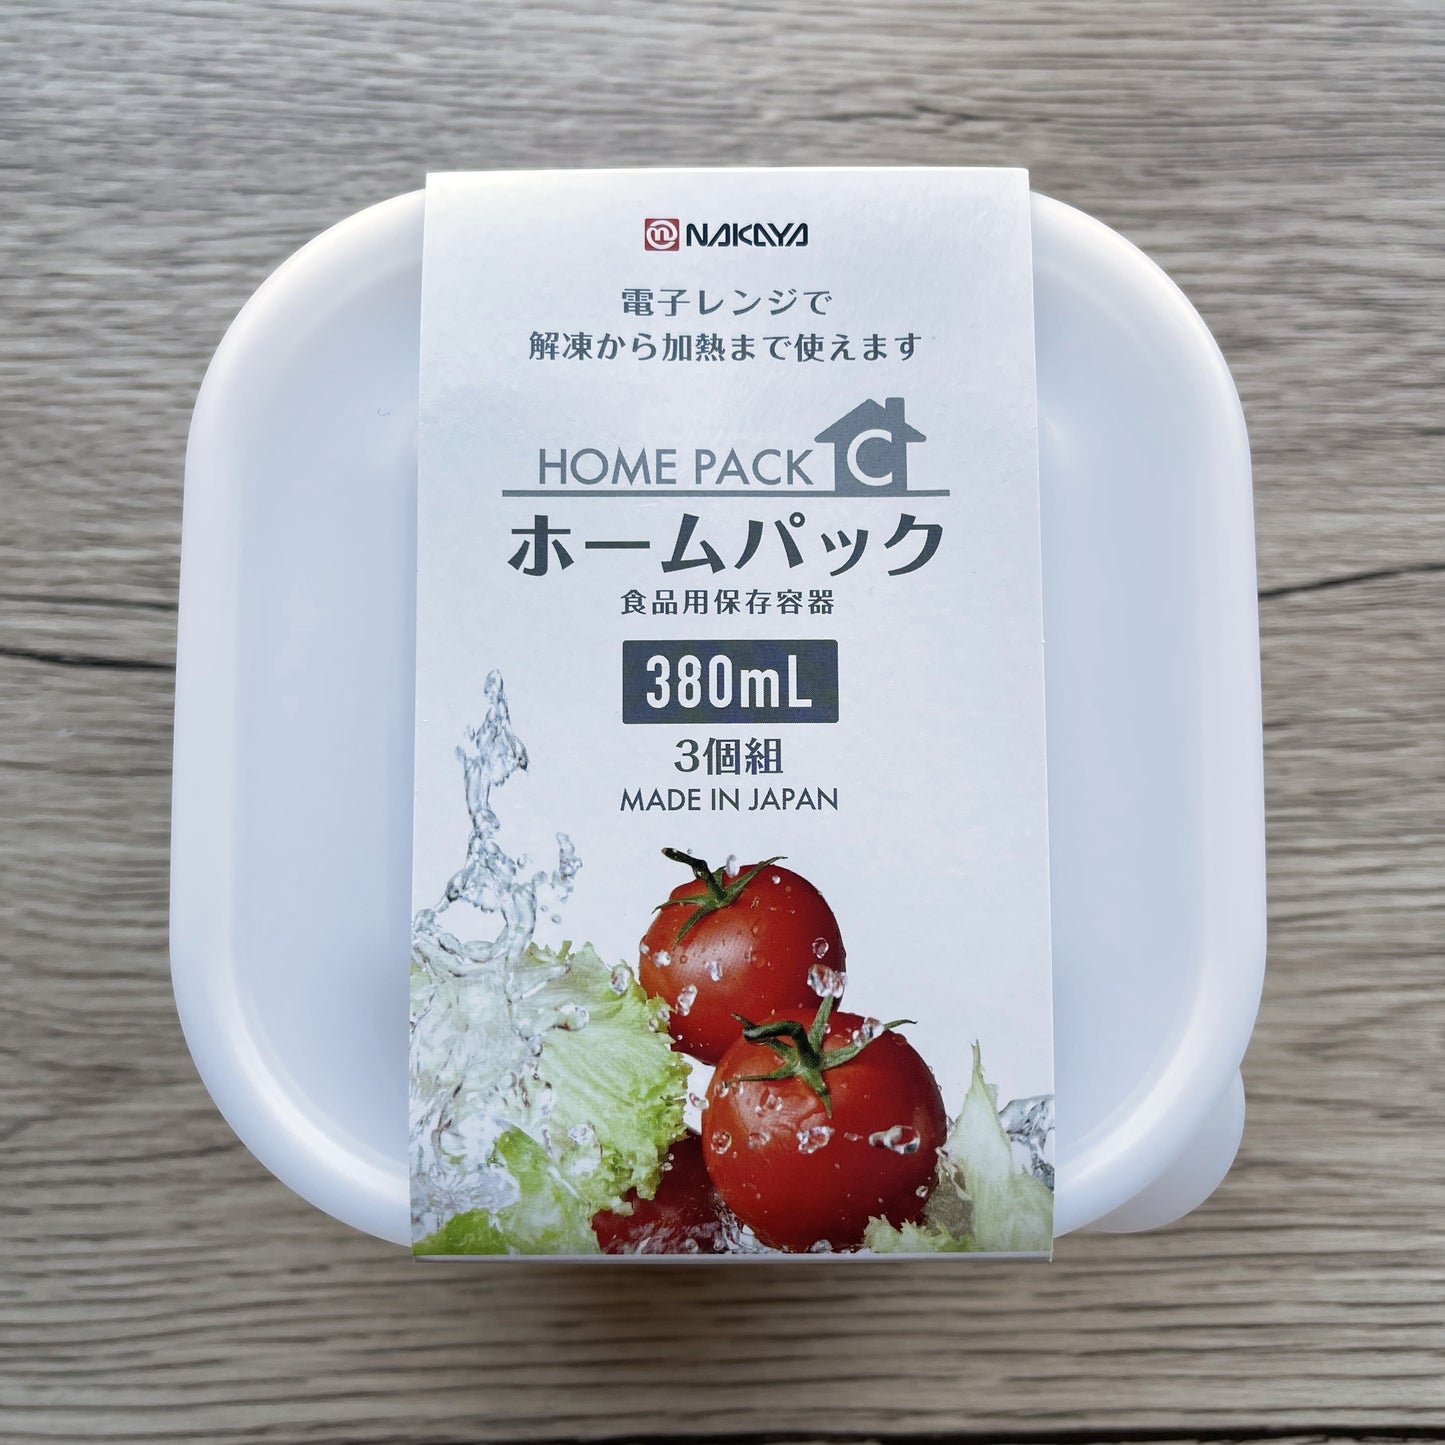 Microwave Container 380ml x3pcs (Made in Japan)